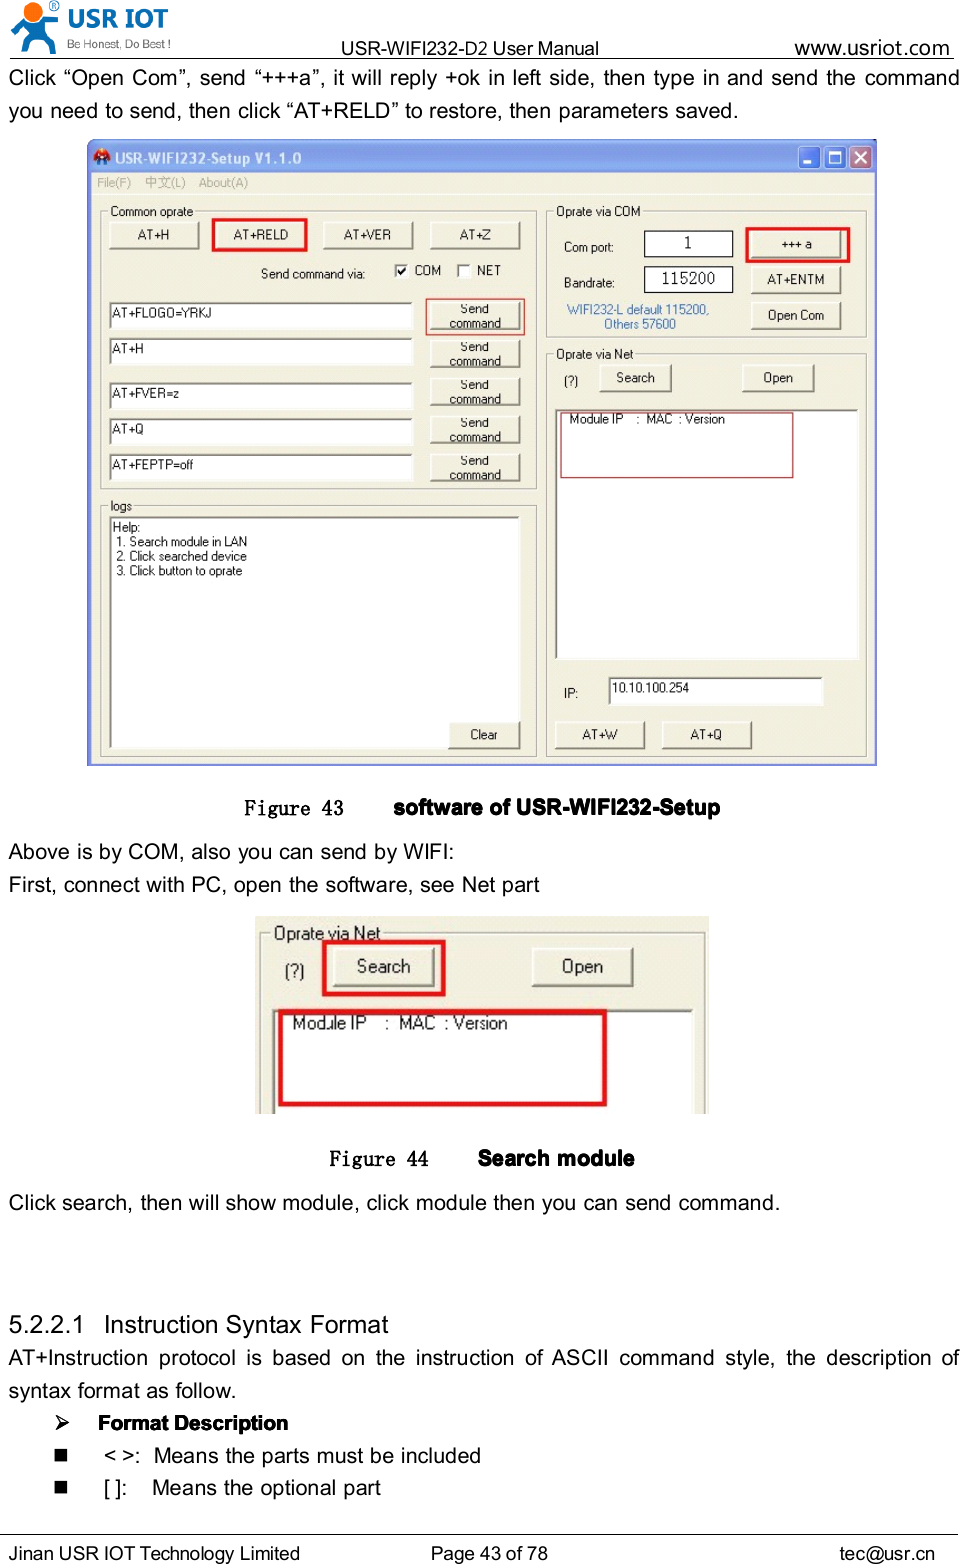 USR-WIFI232- D2 User Manual www.usr iot .comJinan USR IOT Technology Limited Page 43 of 78 tec@usr.cnClick “ Open Com ” , send “ +++a ” , it will reply +ok in left side, then type in and send the commandyou need to send, then click “ AT+RELD ” to restore, then parameters saved.Figure 43 softwaresoftwaresoftwaresoftware ofofofof USR-WIFI232-SetupUSR-WIFI232-SetupUSR-WIFI232-SetupUSR-WIFI232-SetupAbove is by COM, also you can send by WIFI:First, connect with PC, open the software, see Net partFigure 44 SearchSearchSearchSearch modulemodulemodulemoduleClick search, then will show module, click module then you can send command.5.2.2.1 Instruction Syntax FormatAT+Instruction protocol is based on the instruction of ASCII command style, the description ofsyntax format as follow.FormatFormatFormatFormat DescriptionDescriptionDescriptionDescription&lt; &gt;: Means the parts must be included[ ]: Means the optional part